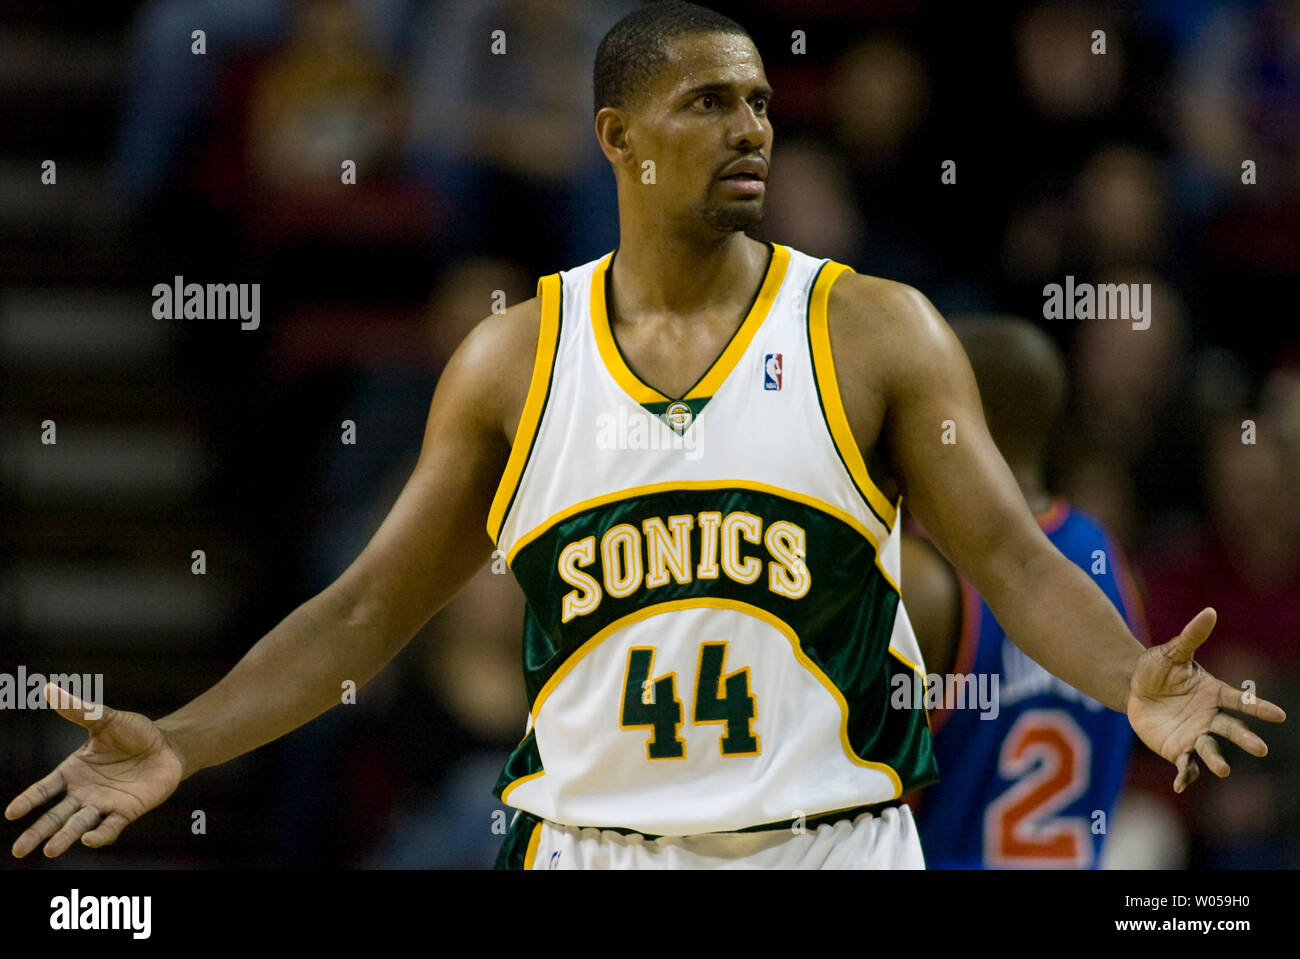 Seattle SuperSonics' Kurt Thomas (R) shows his frustration after being called for a foul against New York Knicks' Zach Randolph during the second half at the Key Arena in Seattle on February 2, 2008. The SuperSonics beat the Knicks 86-85. (UPI Photo/Jim Bryant) Stock Photo